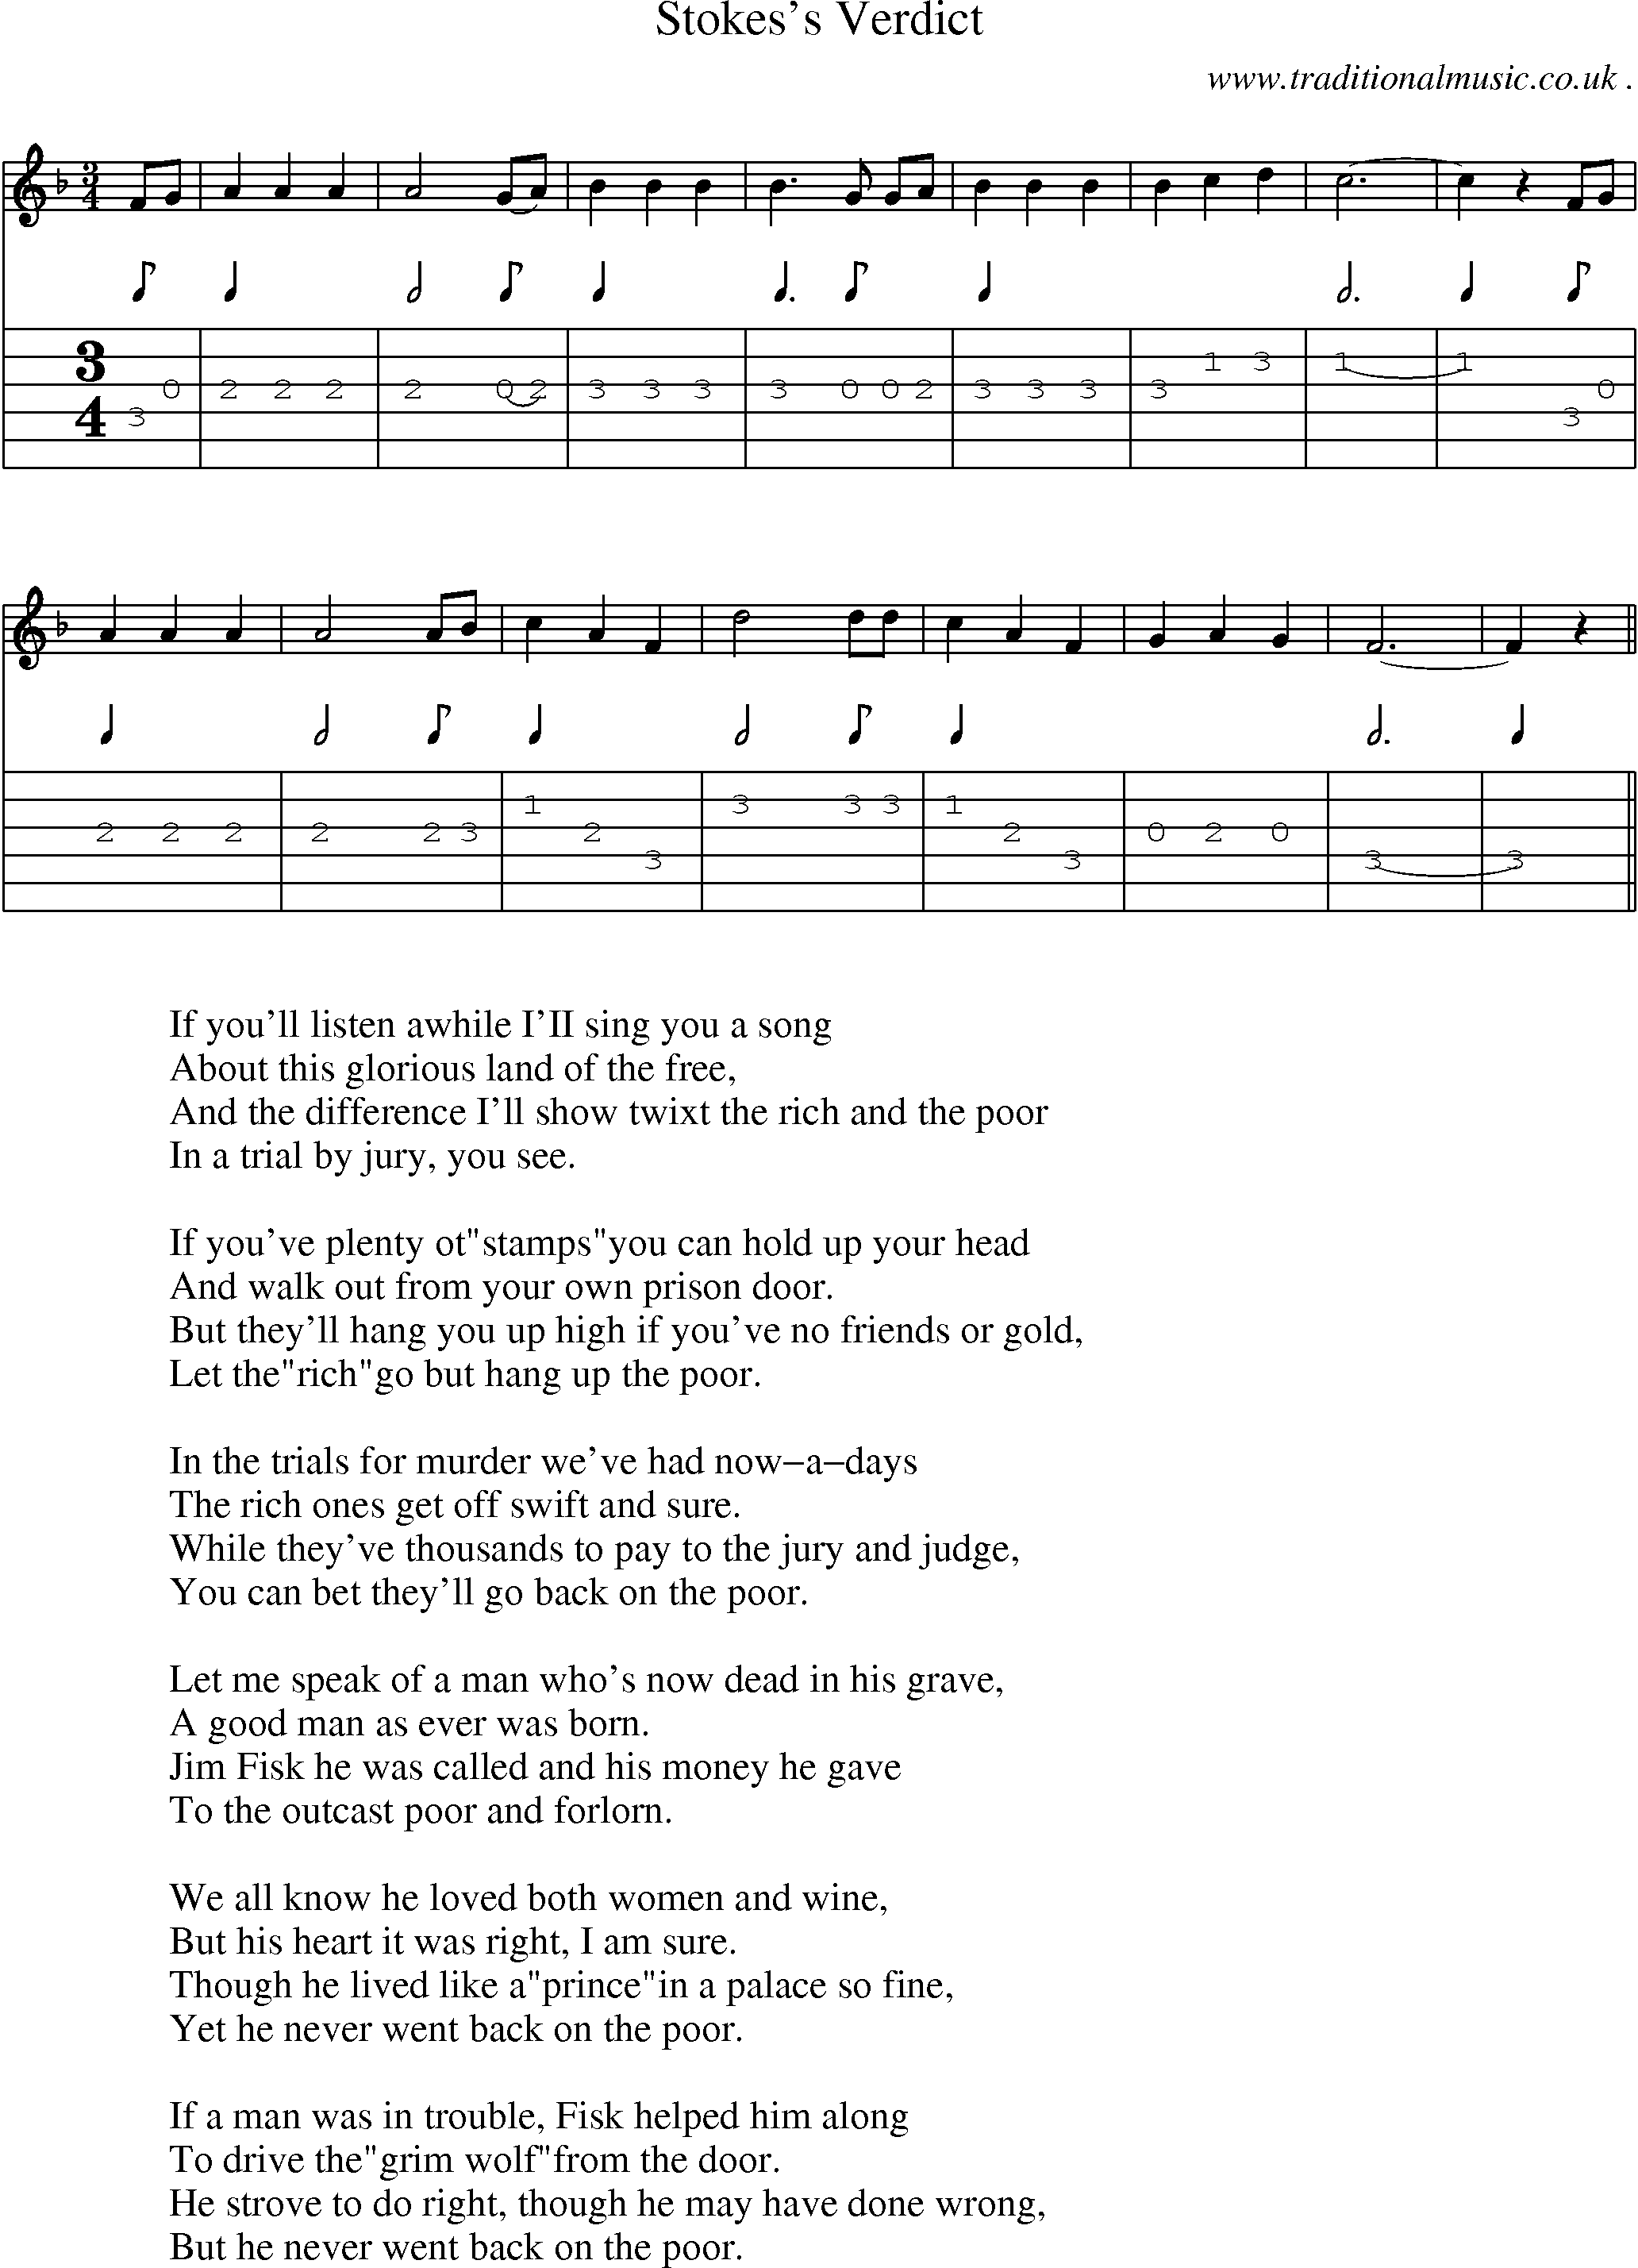 Sheet-Music and Guitar Tabs for Stokess Verdict